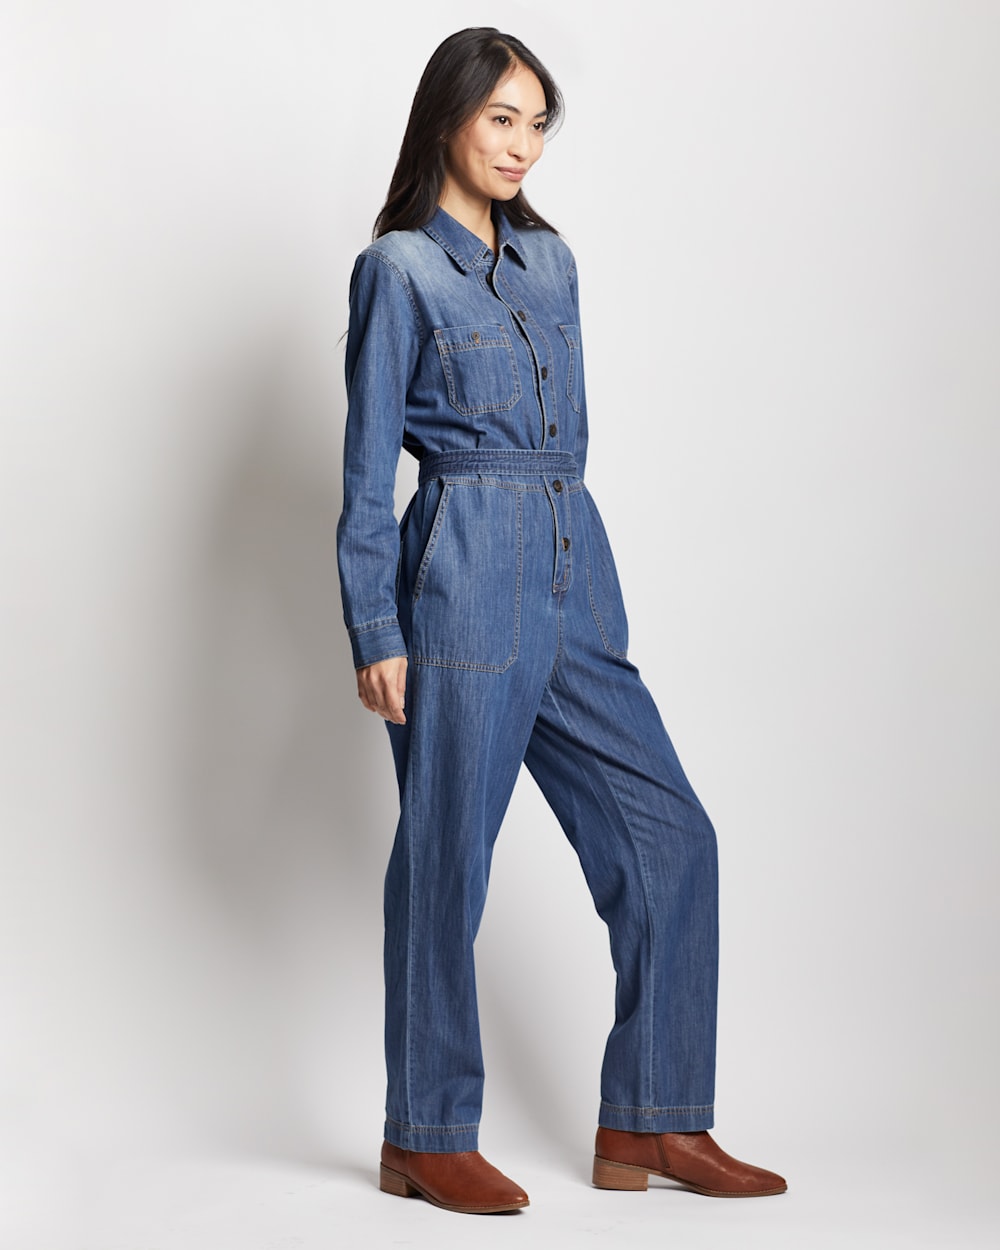 ALTERNATE VIEW OF WOMEN'S CHAMBRAY UTILITY JUMPSUIT IN MEDIUM BLUE image number 4